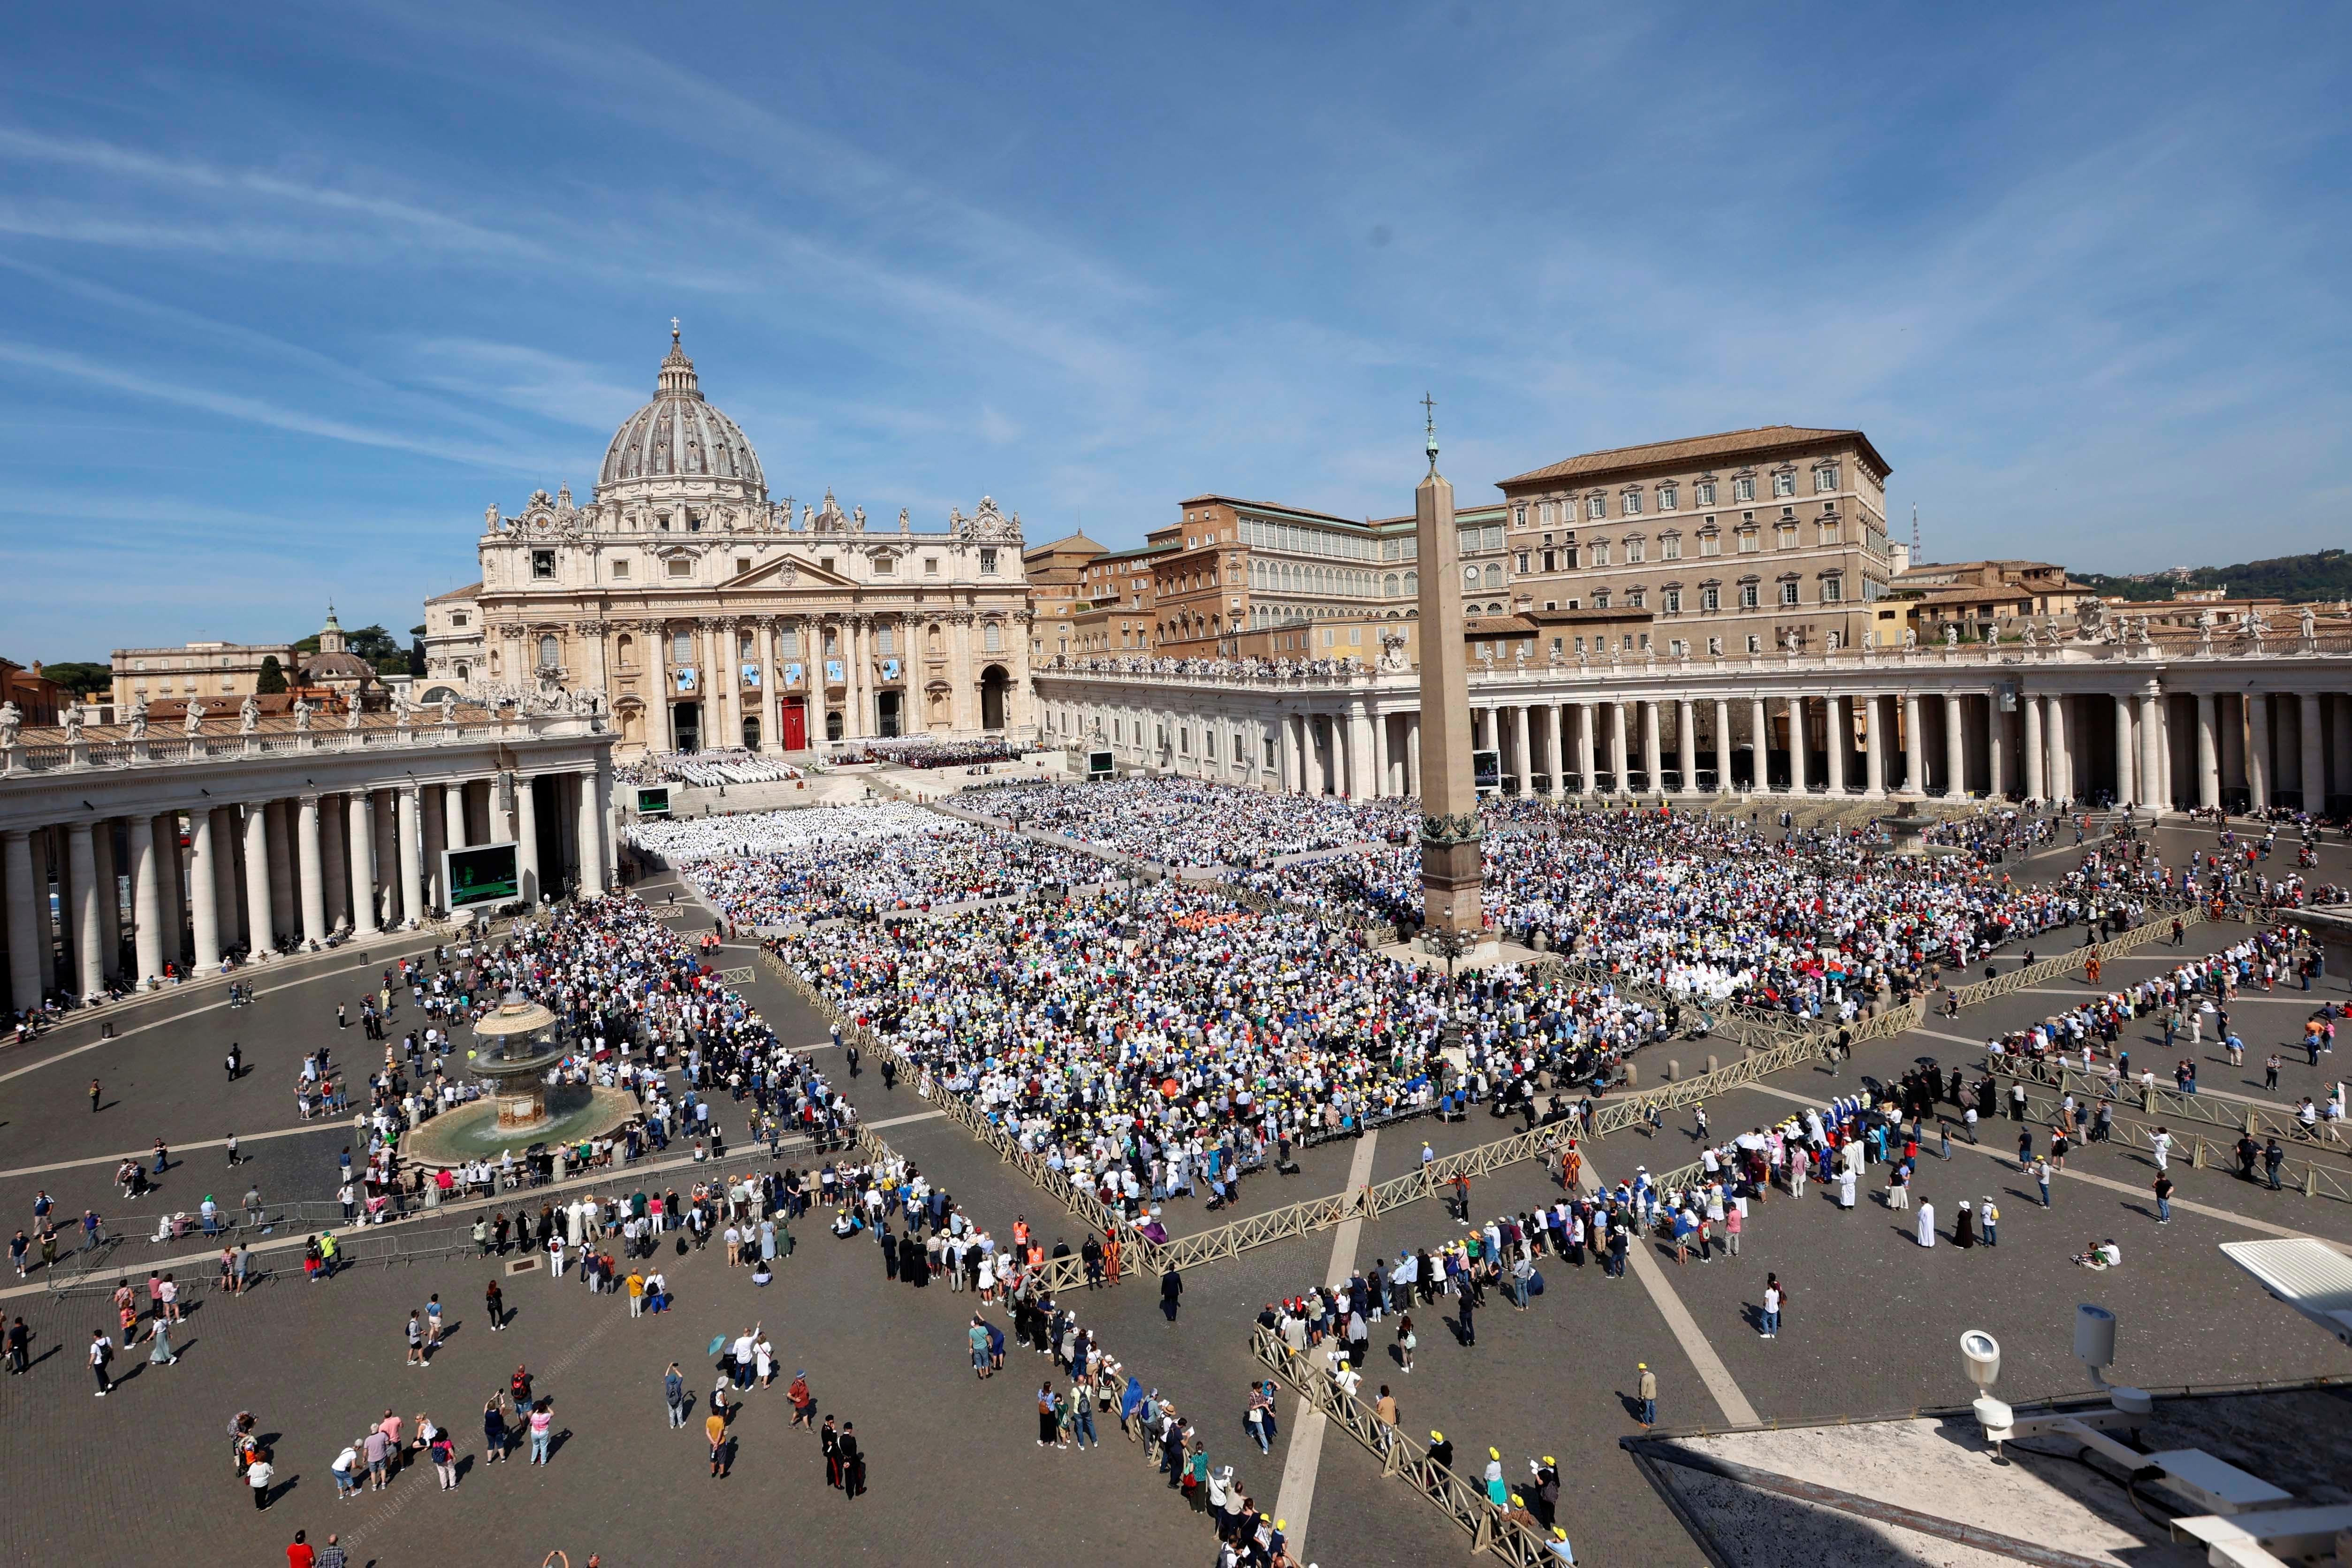 St. Peter's Basilica Events